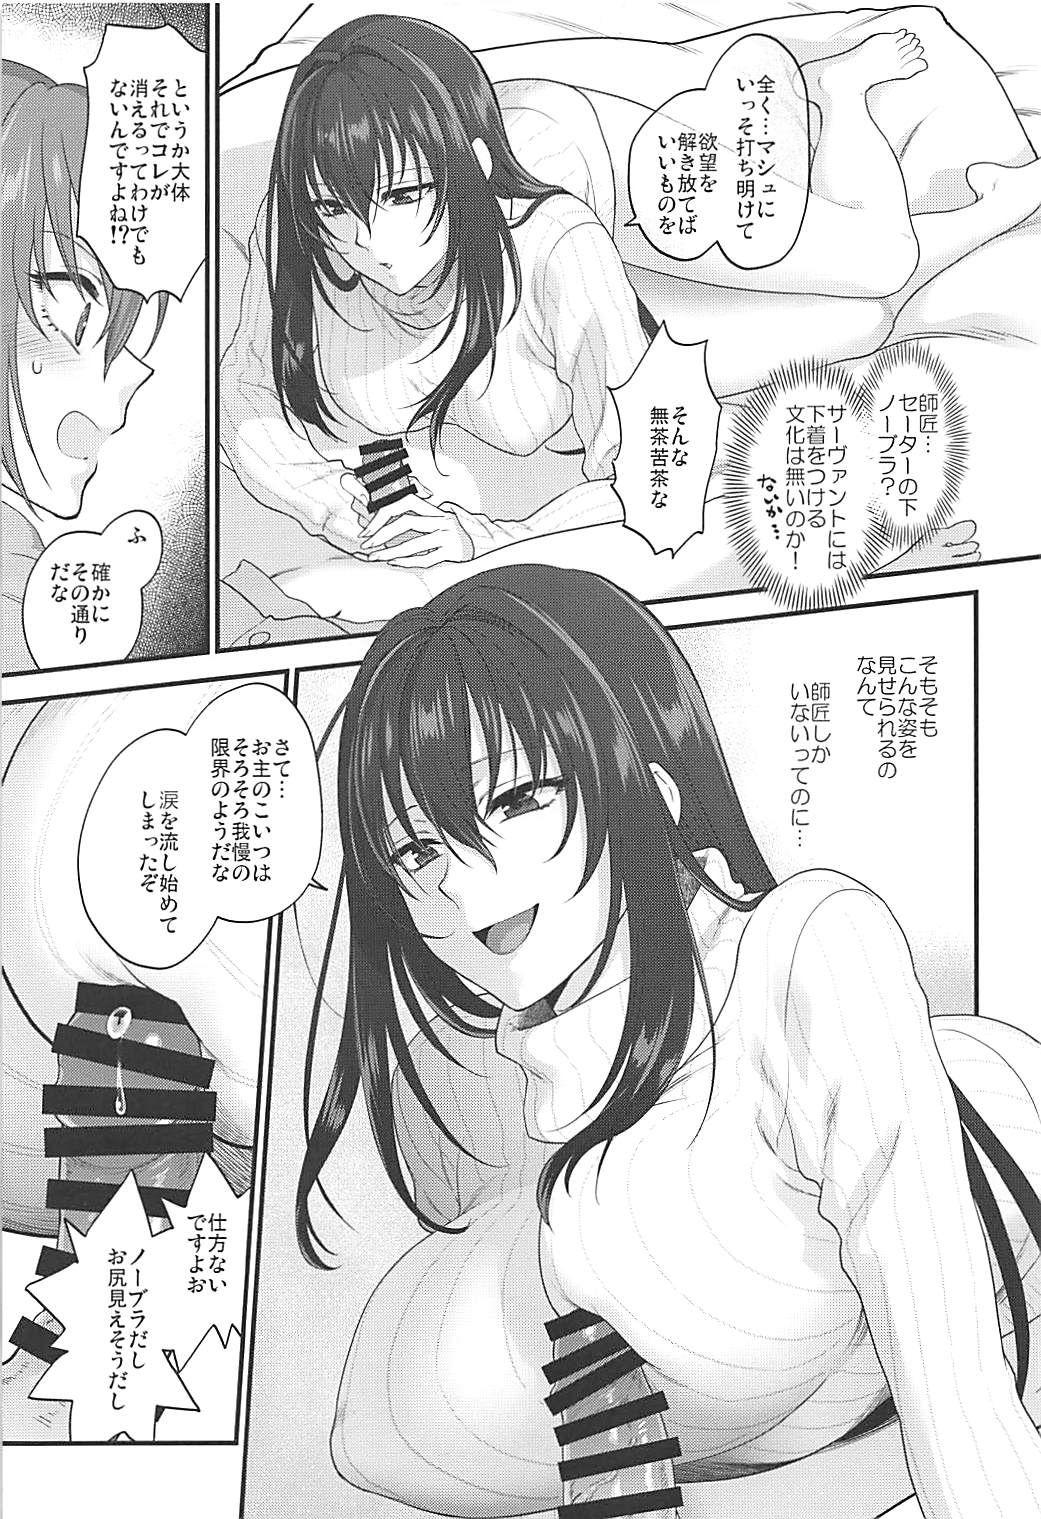 Free Rough Porn In my room. - Fate grand order Amateursex - Page 8